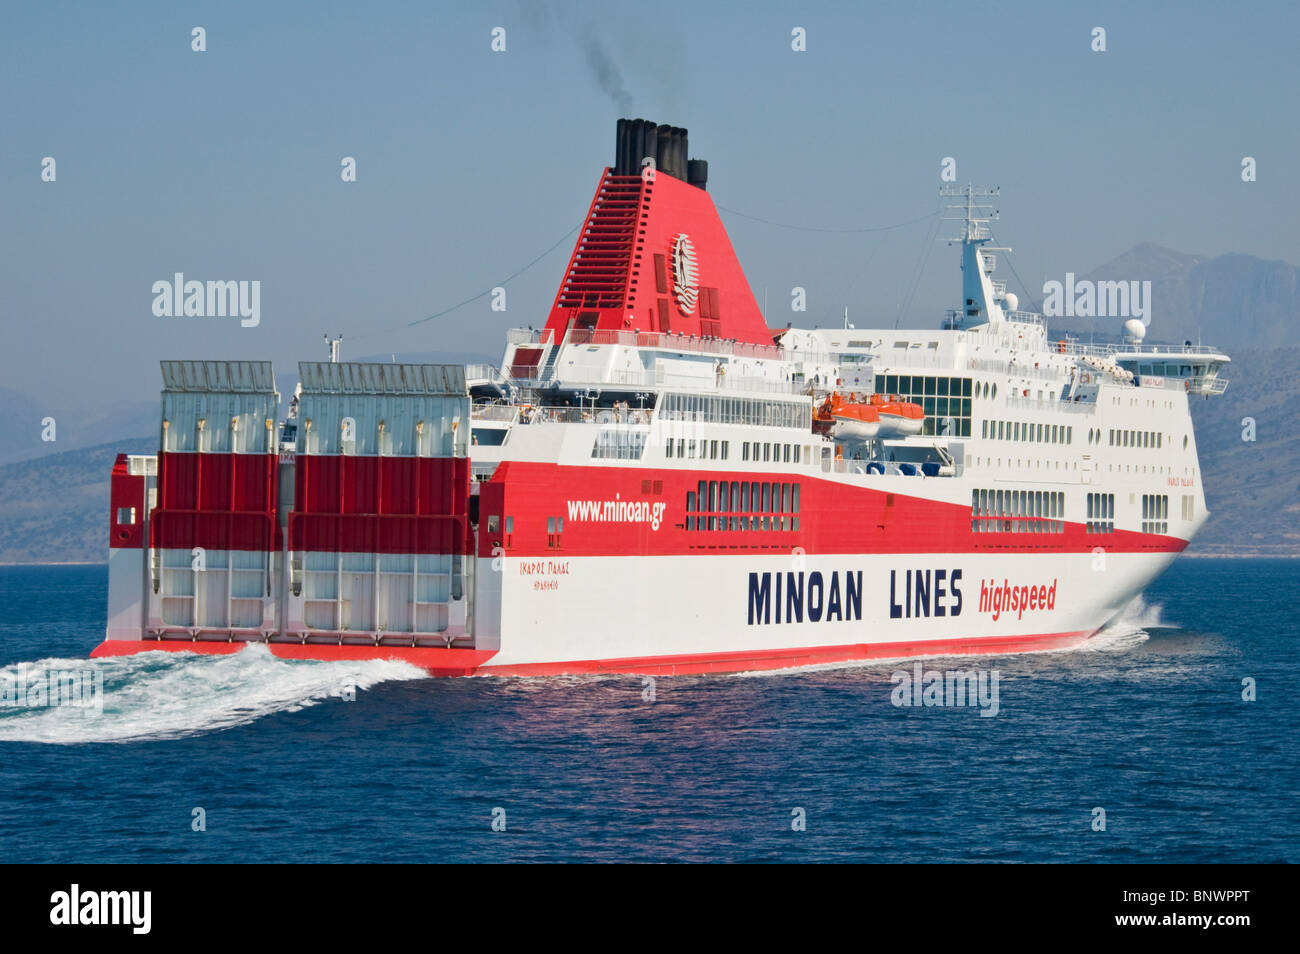 MINOAN LINES highspeed ferry Ikarus Palace off the Greek island of ...